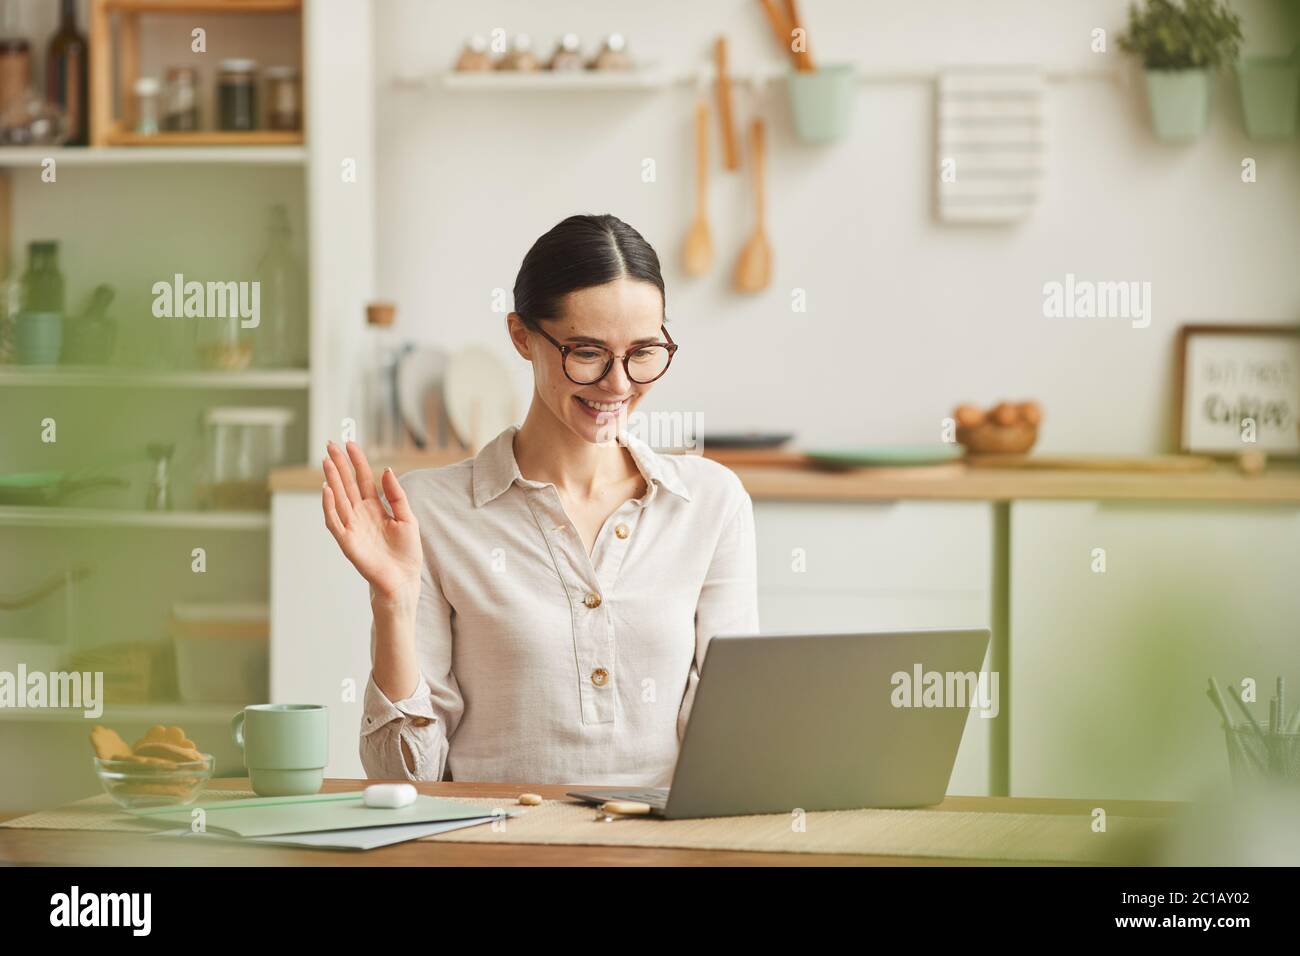 Warm-toned portrait of smiling young woman waving at camera during online meeting while working from home, copy space Stock Photo